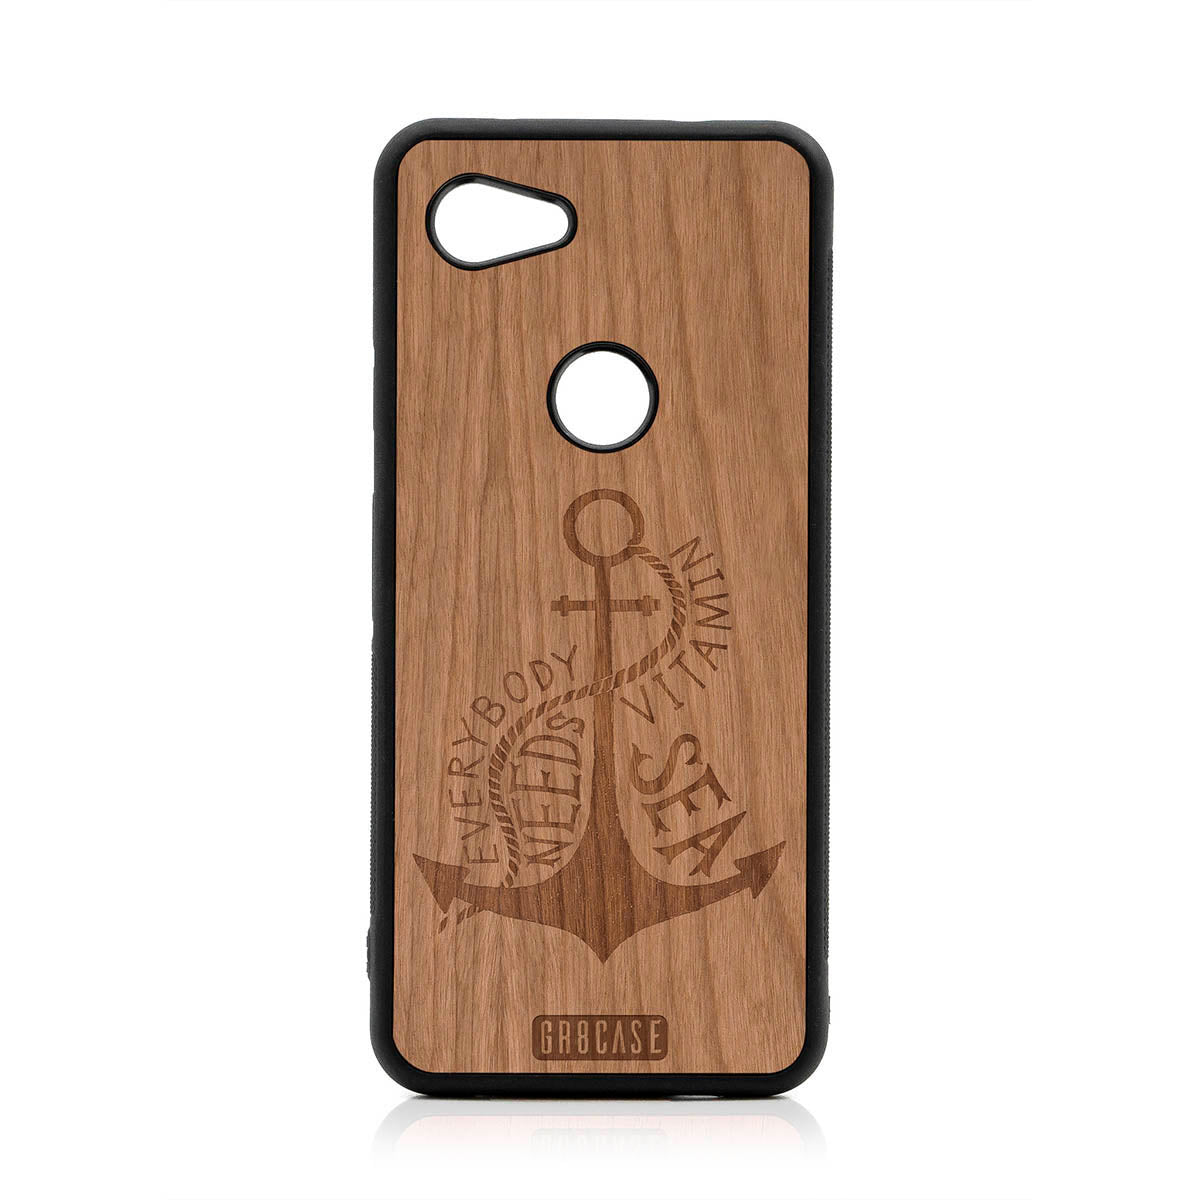 Everybody Needs Vitamin Sea (Anchor) Design Wood Case For Google Pixel 3A XL by GR8CASE